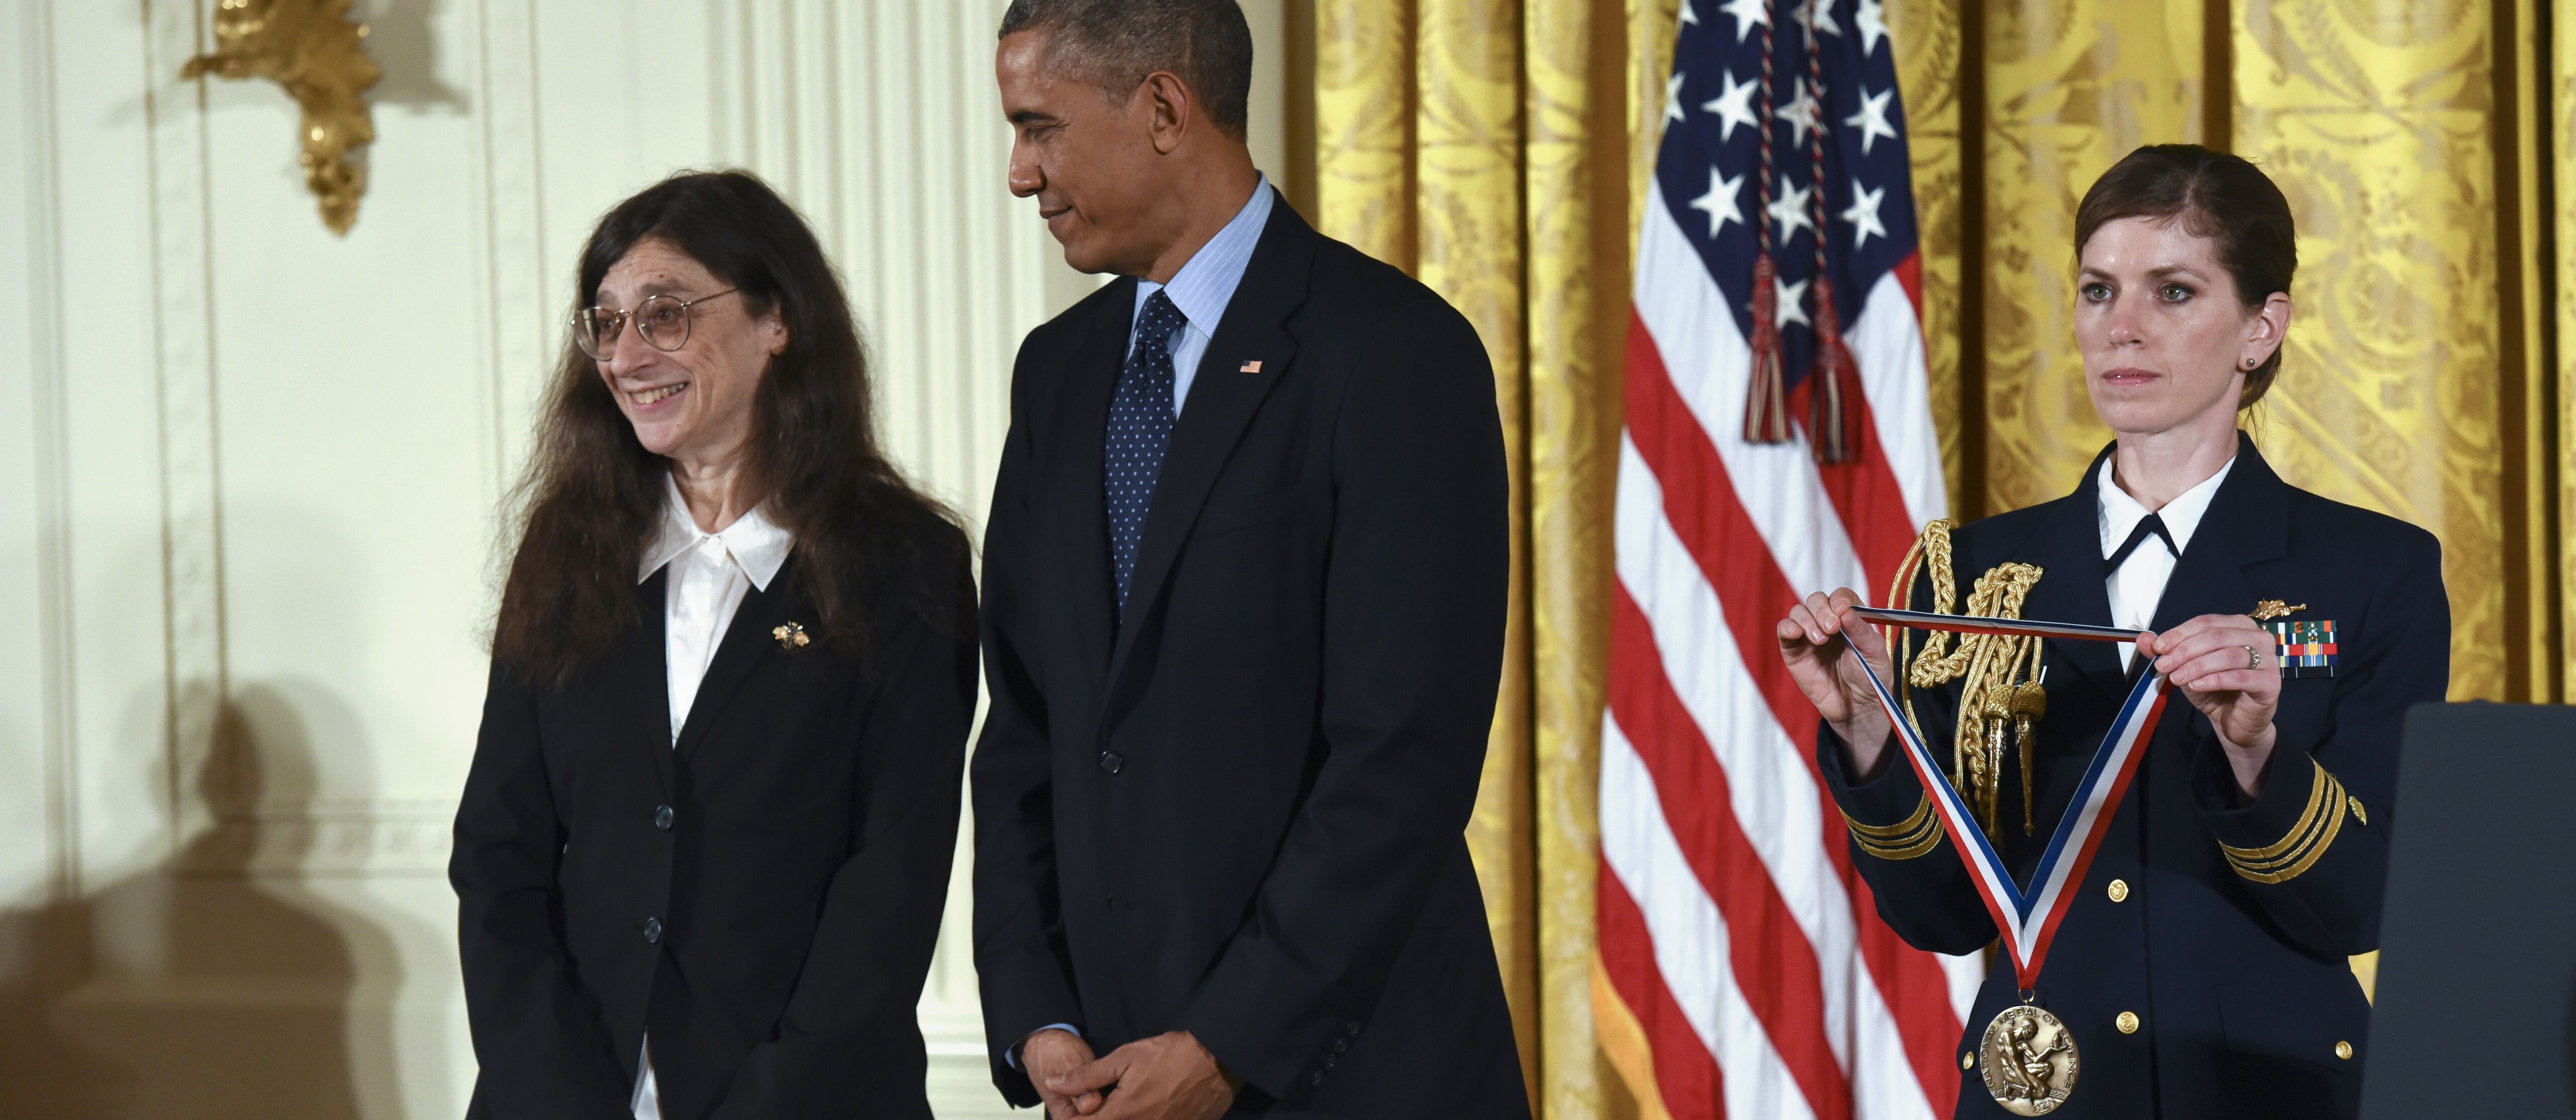 May Berenbaum receives a National Medal of Science award from President Obama at a White House ceremony.